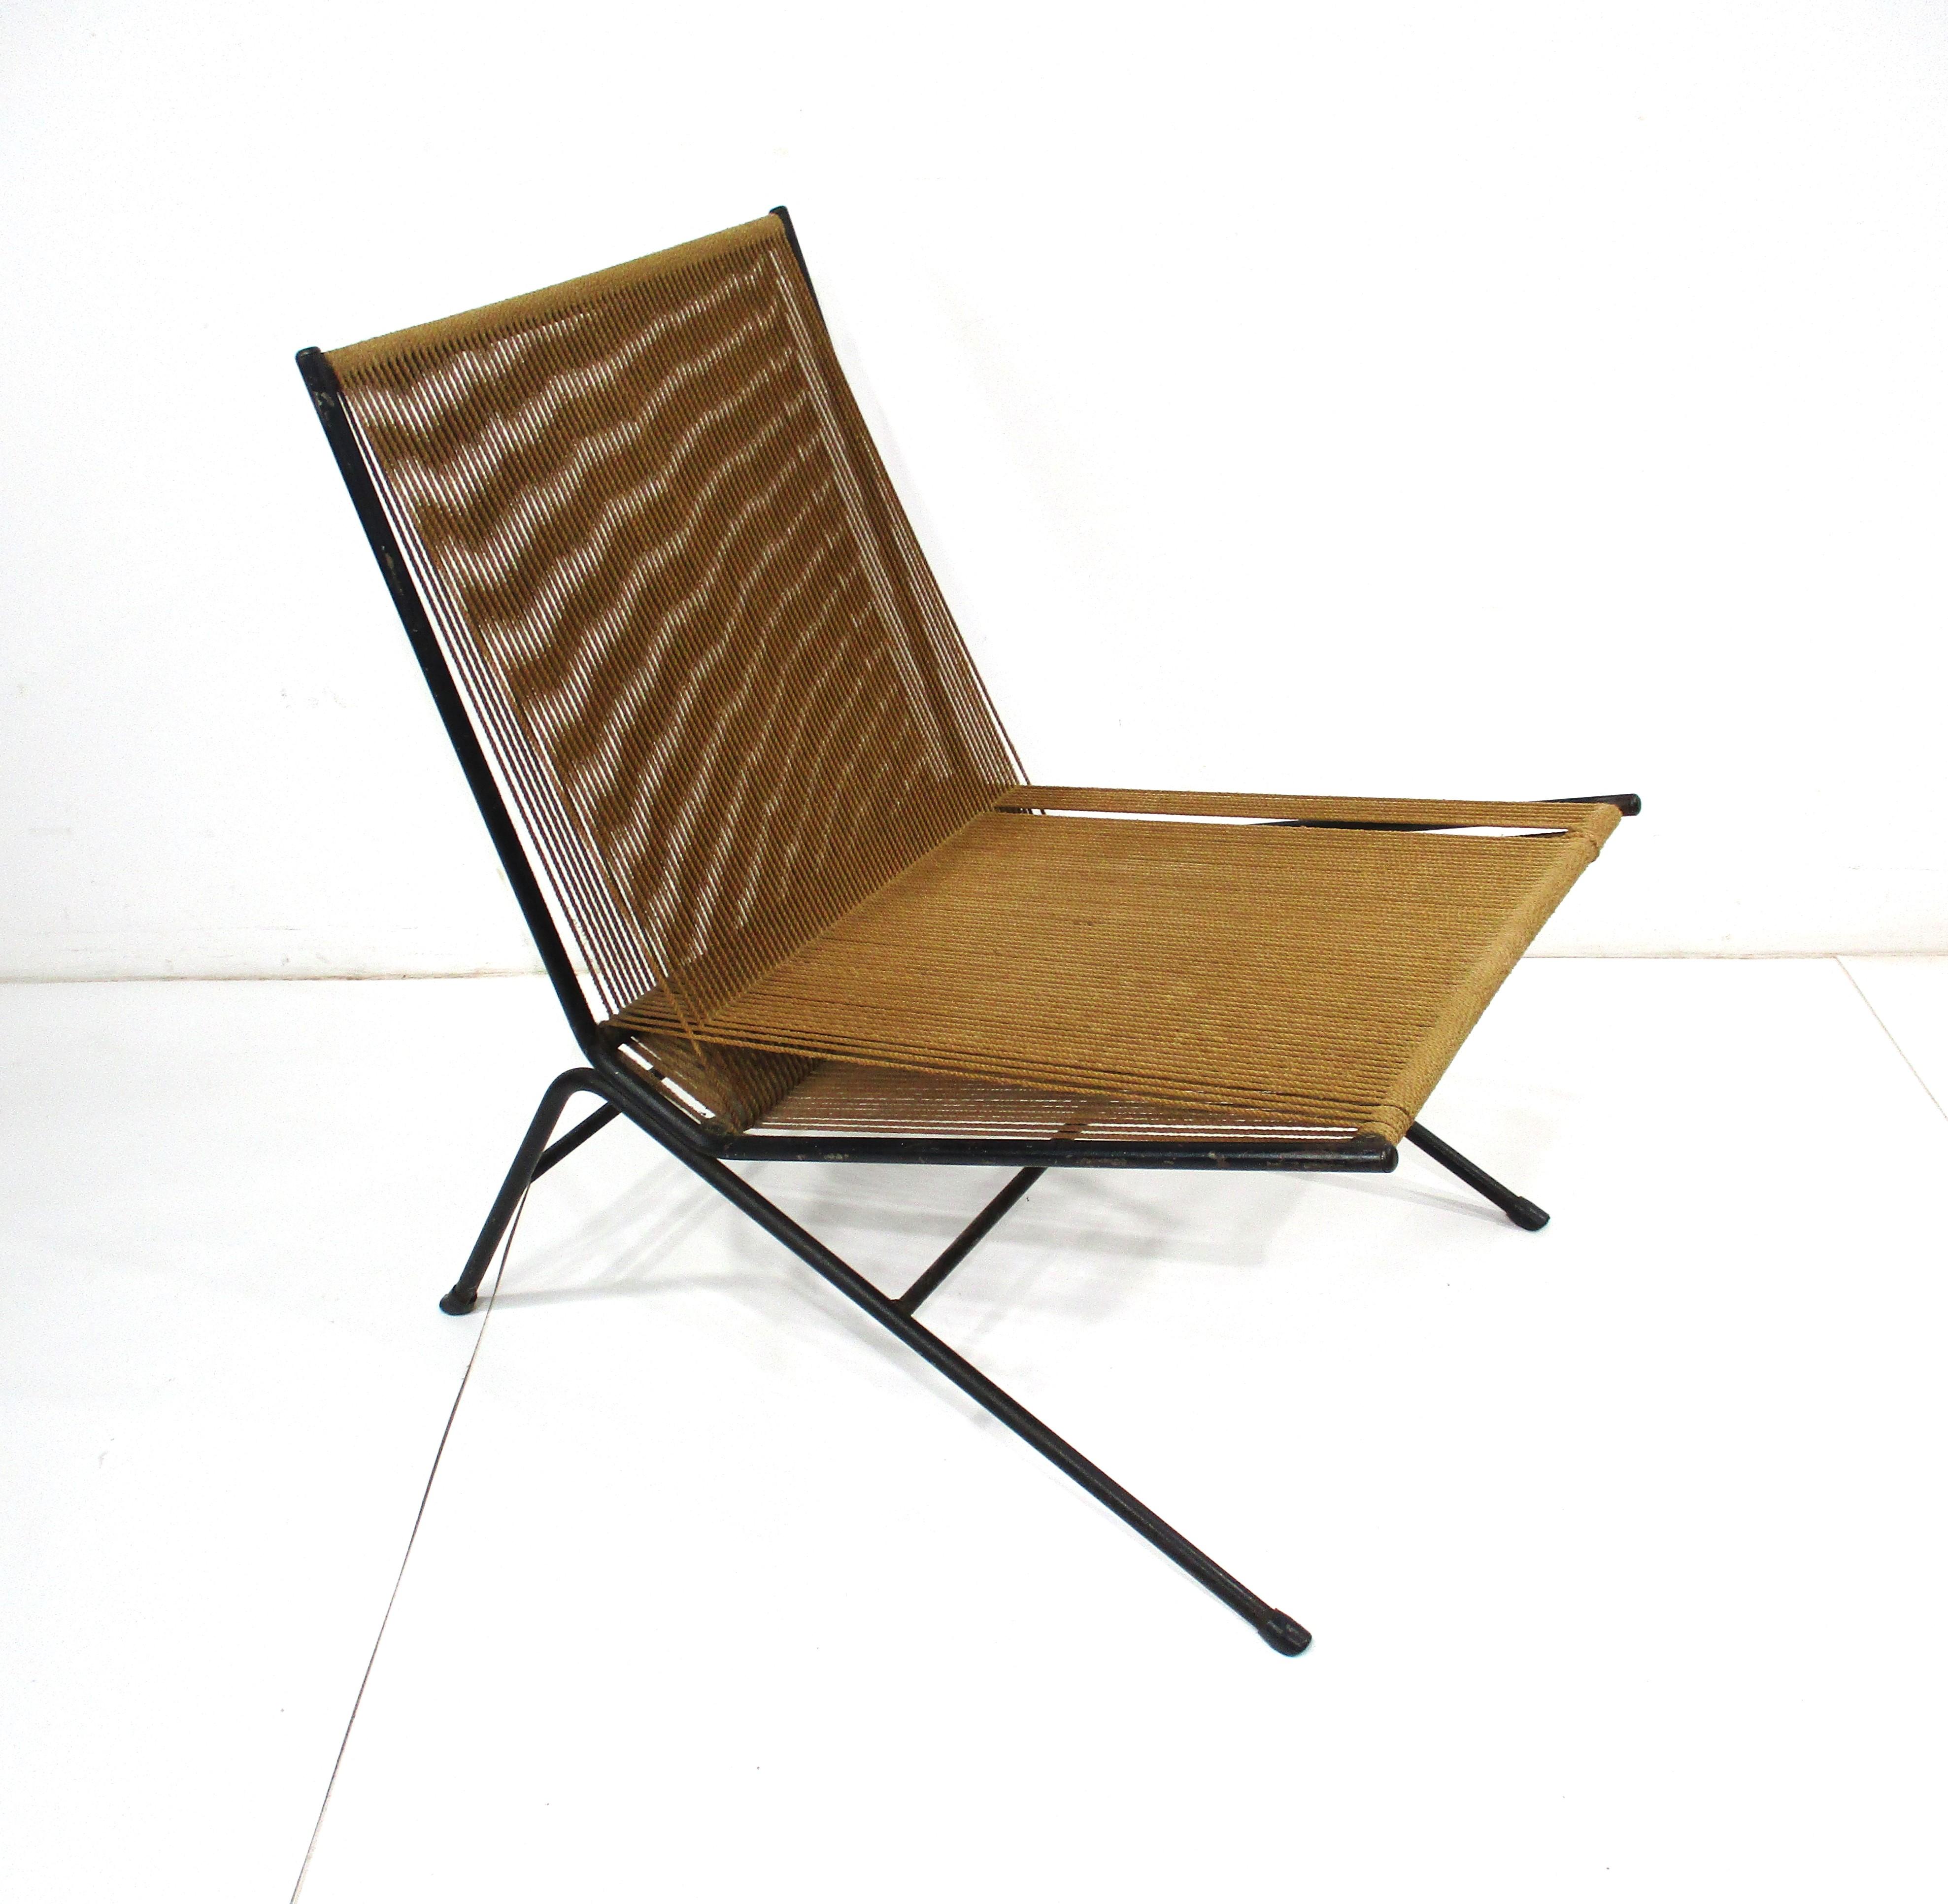 A angled sculptural black iron framed Mid Century lounge chair with string woven back and seat bottom . Designed by Allan Gould in the 1950's it brought together two really different materials being heavy iron and light woven rope string . Before